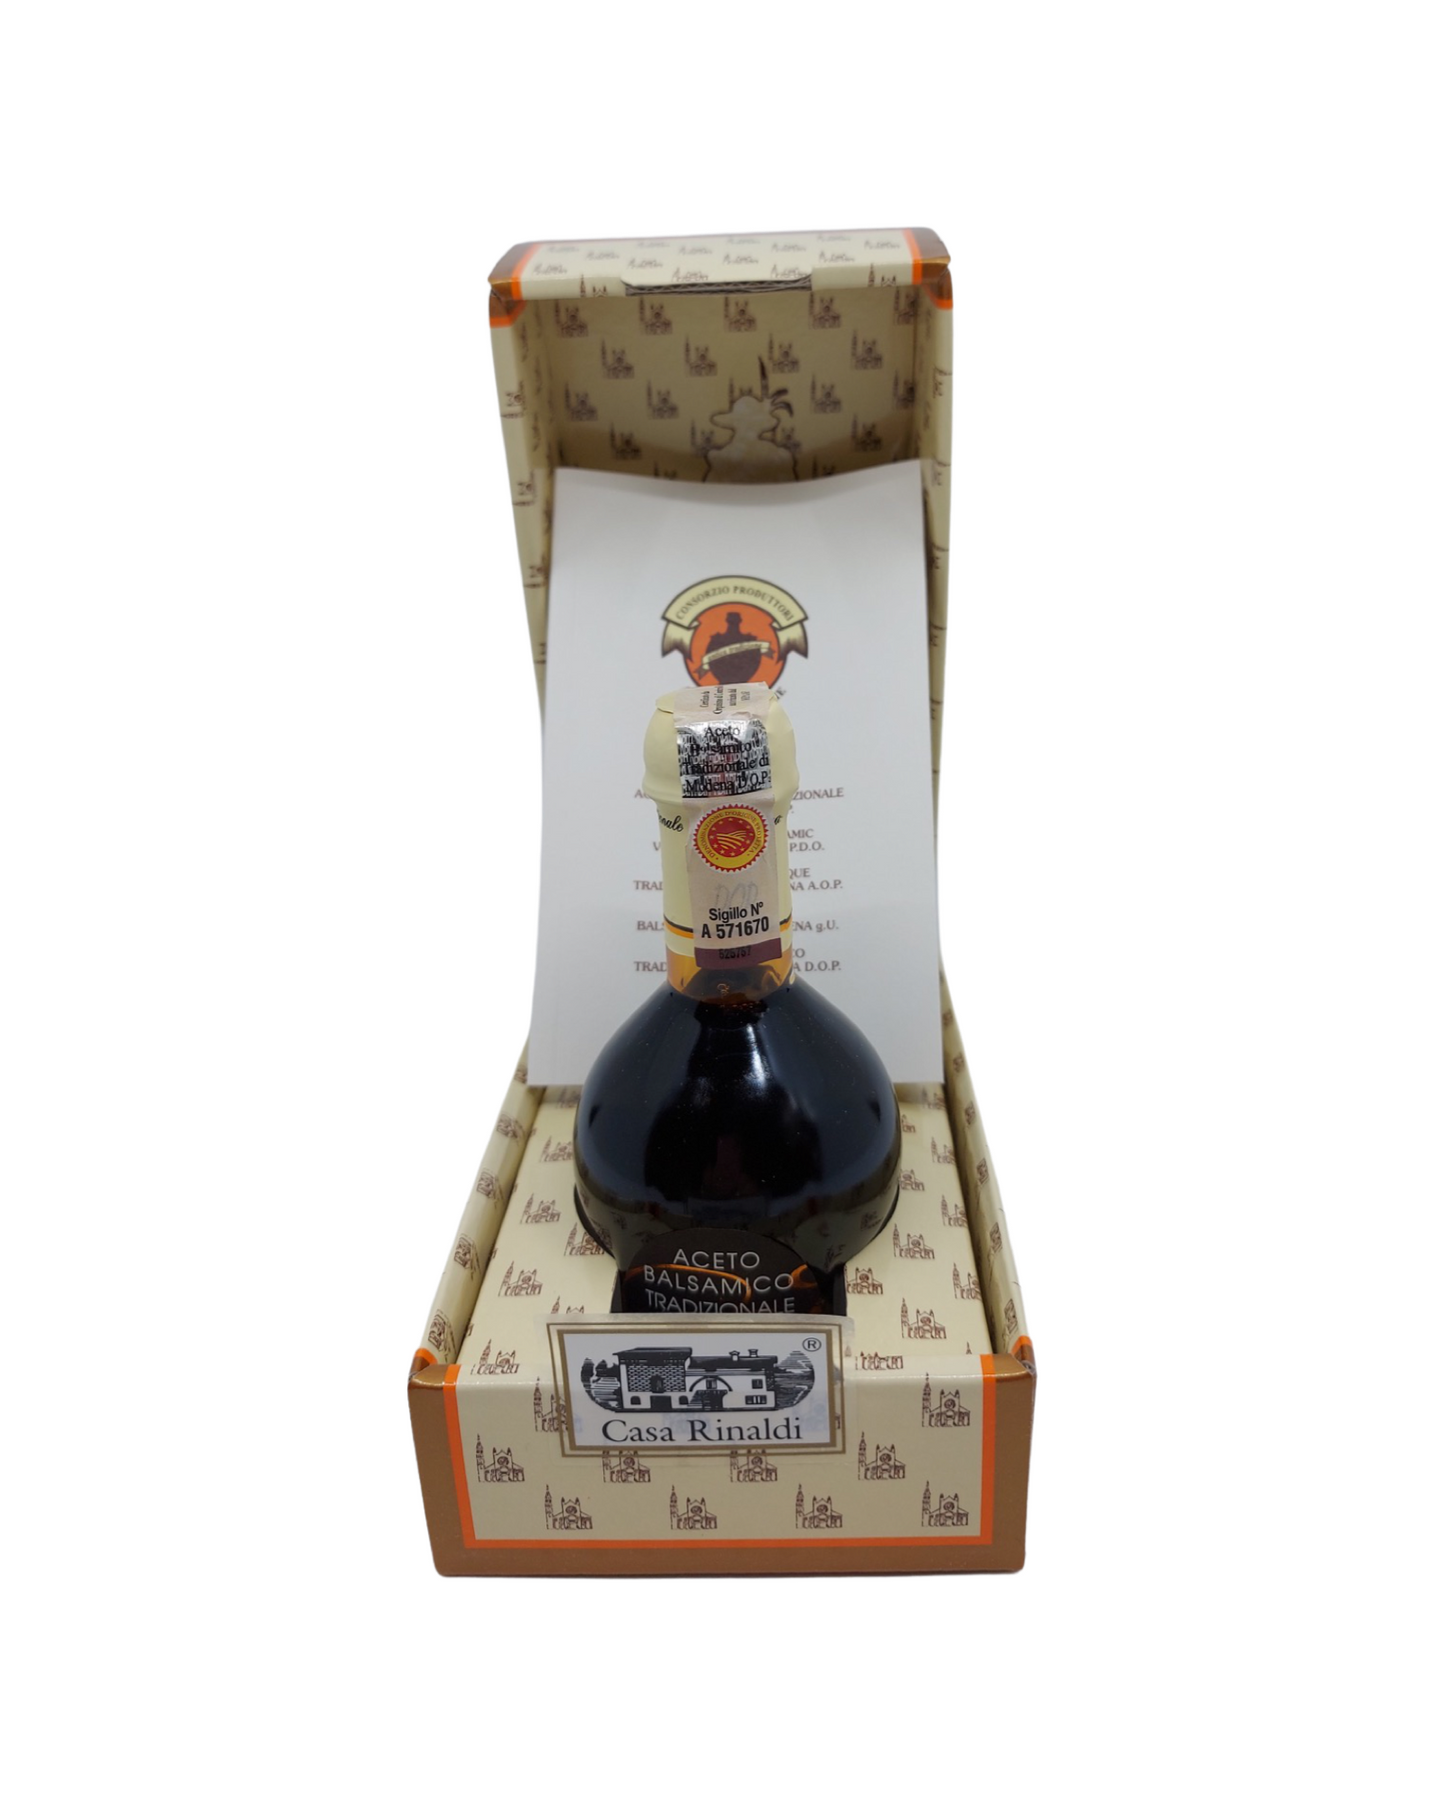 Traditional Balsamic vinegar of Modena Extra Aged (12 yrs) White Cap